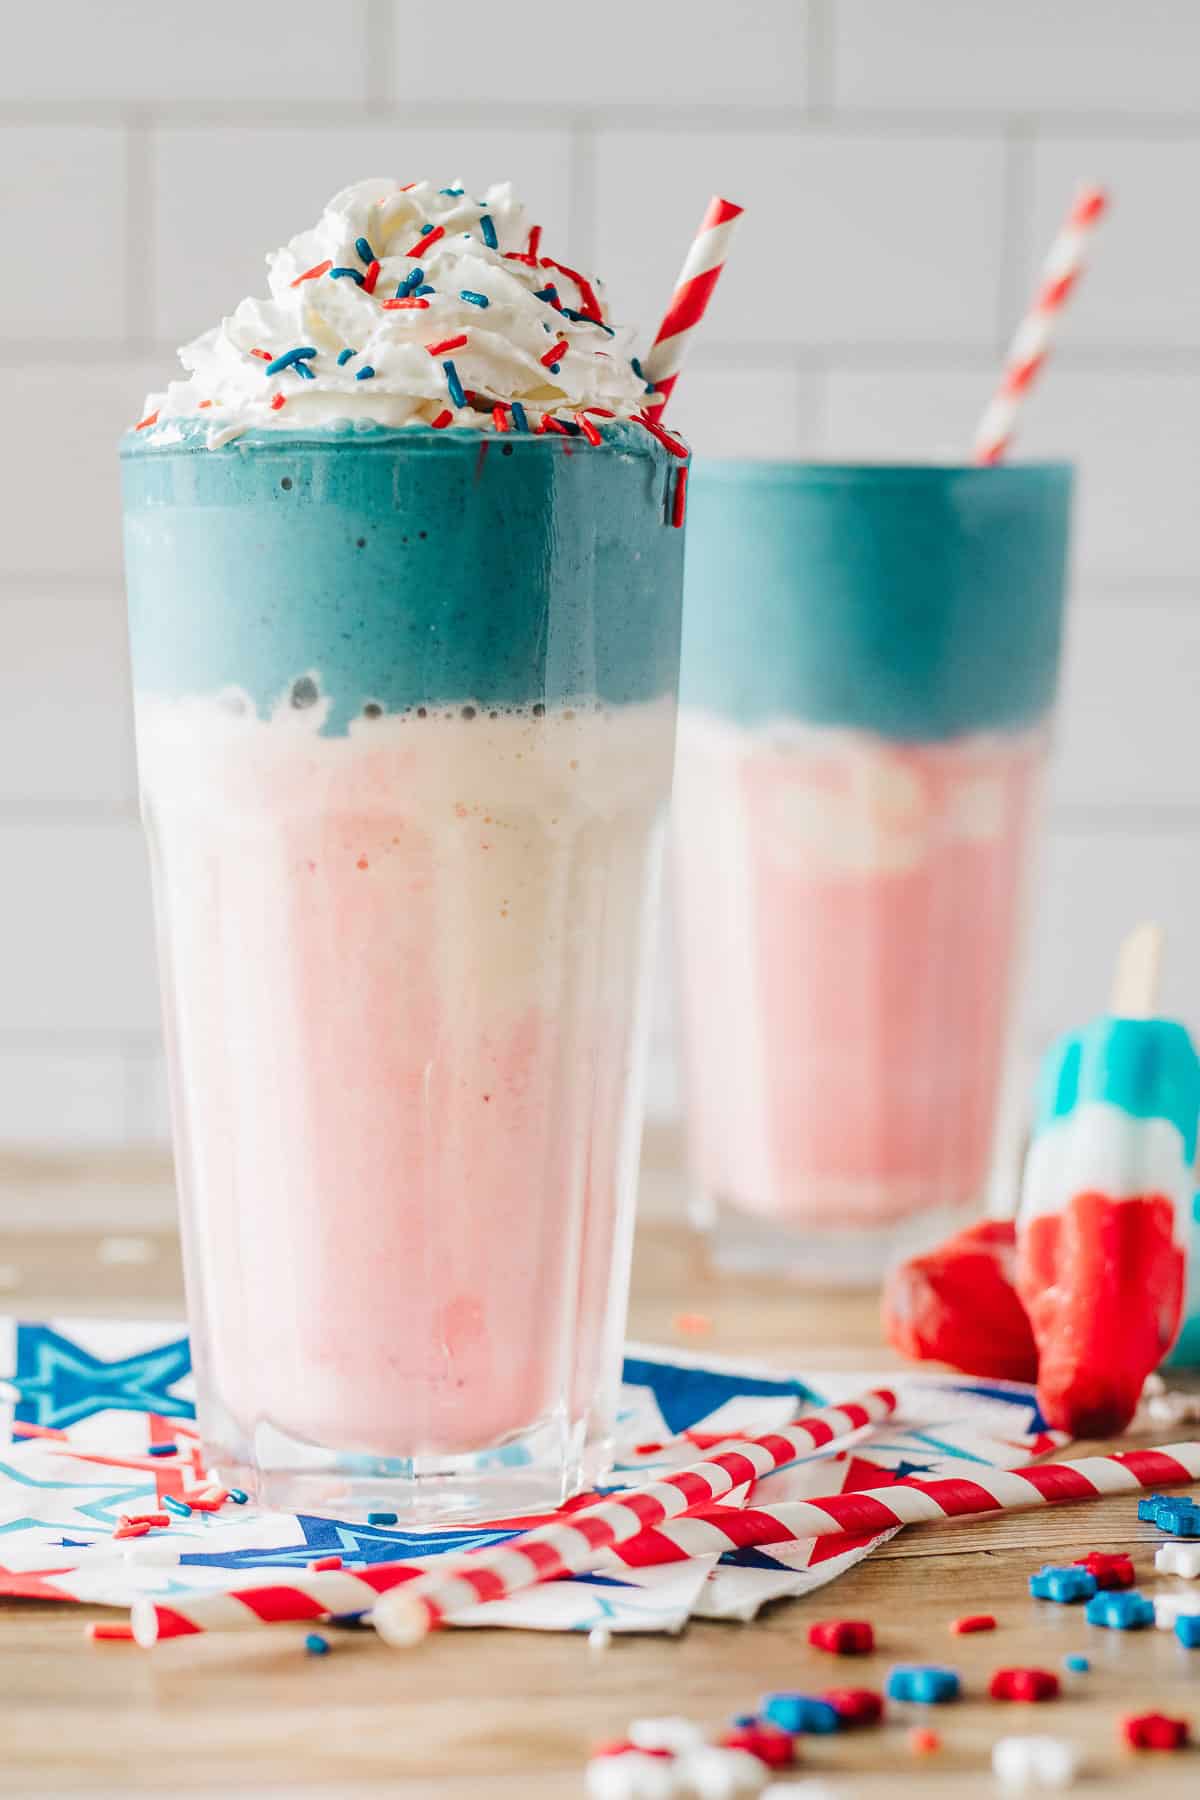 2 layered milkshakes - red, white, and blue, topped with whipped cream and sprinkles.